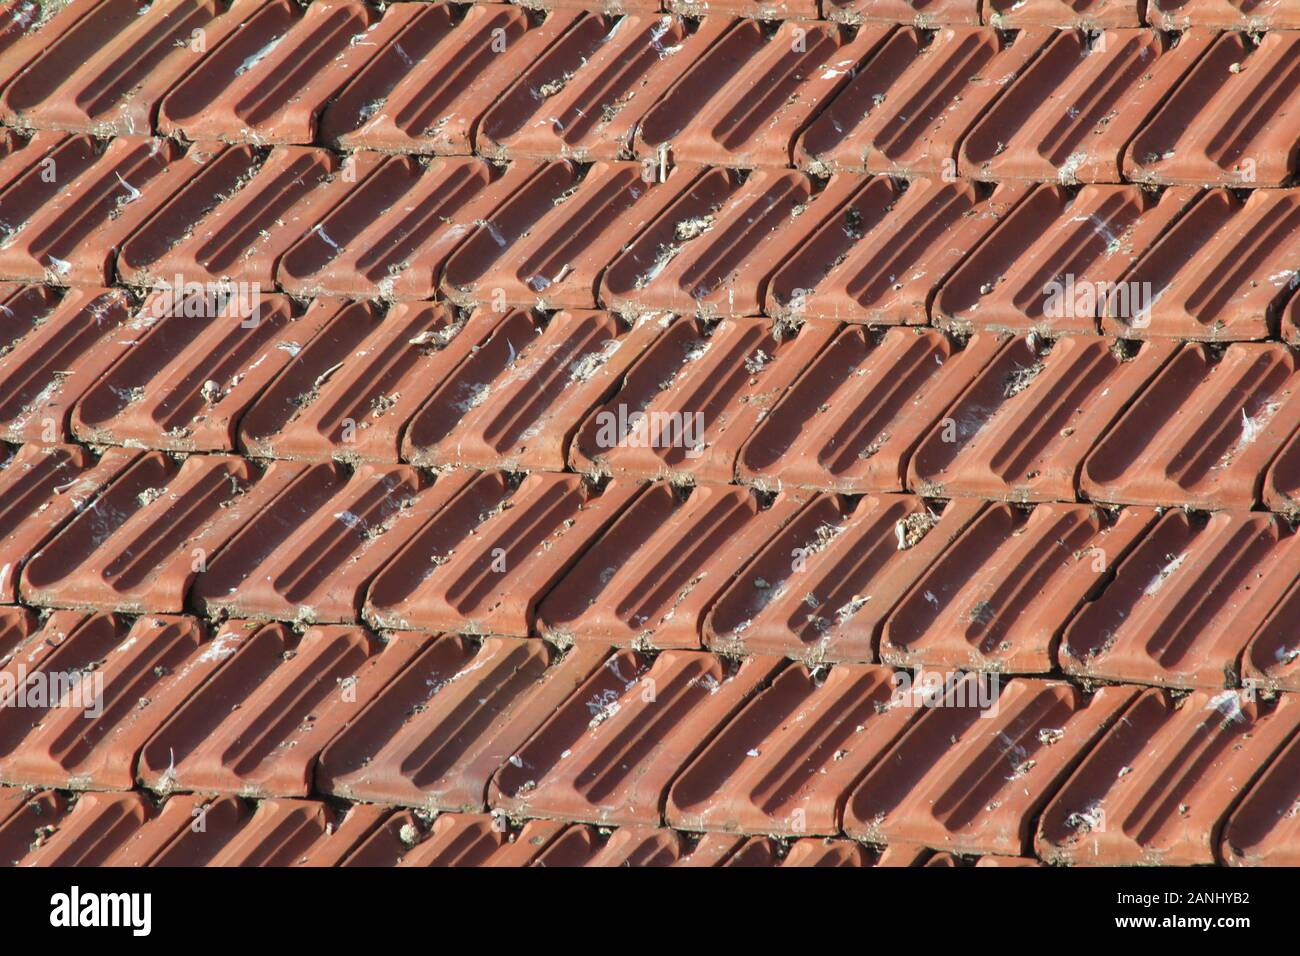 Bird droppings on roof tile Stock Photo